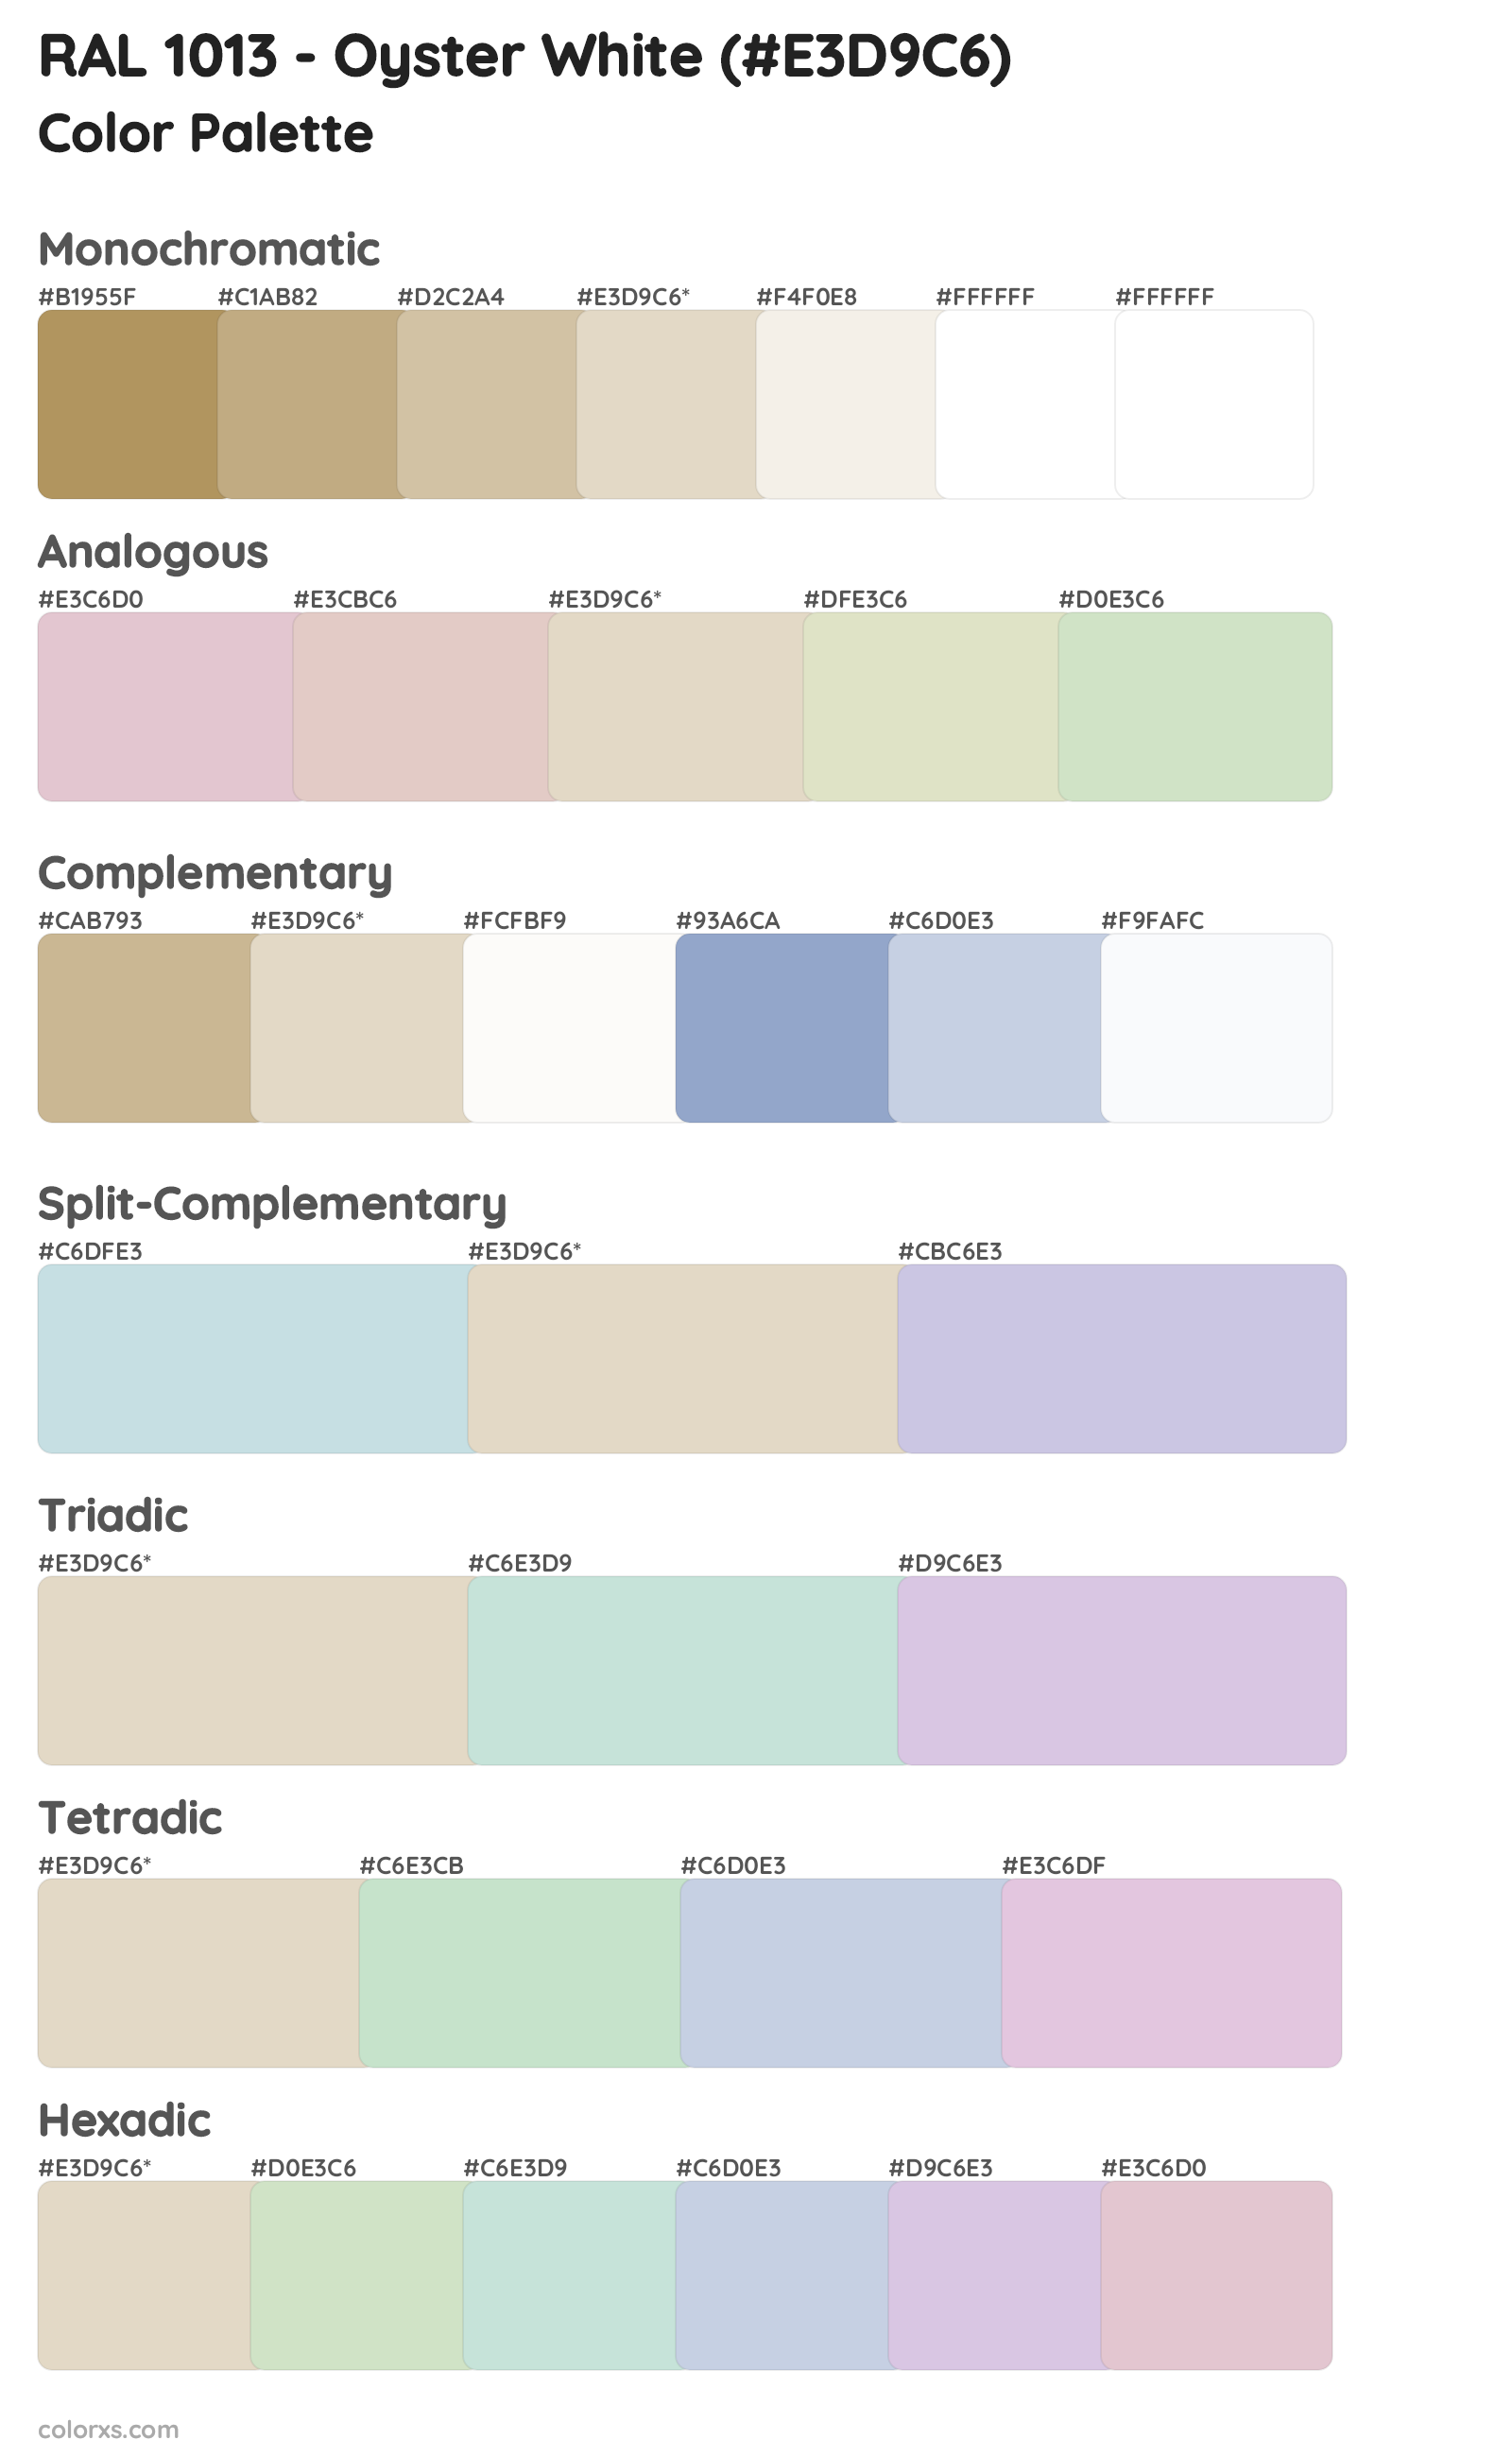 RAL 1013 - Oyster White Color Scheme Palettes